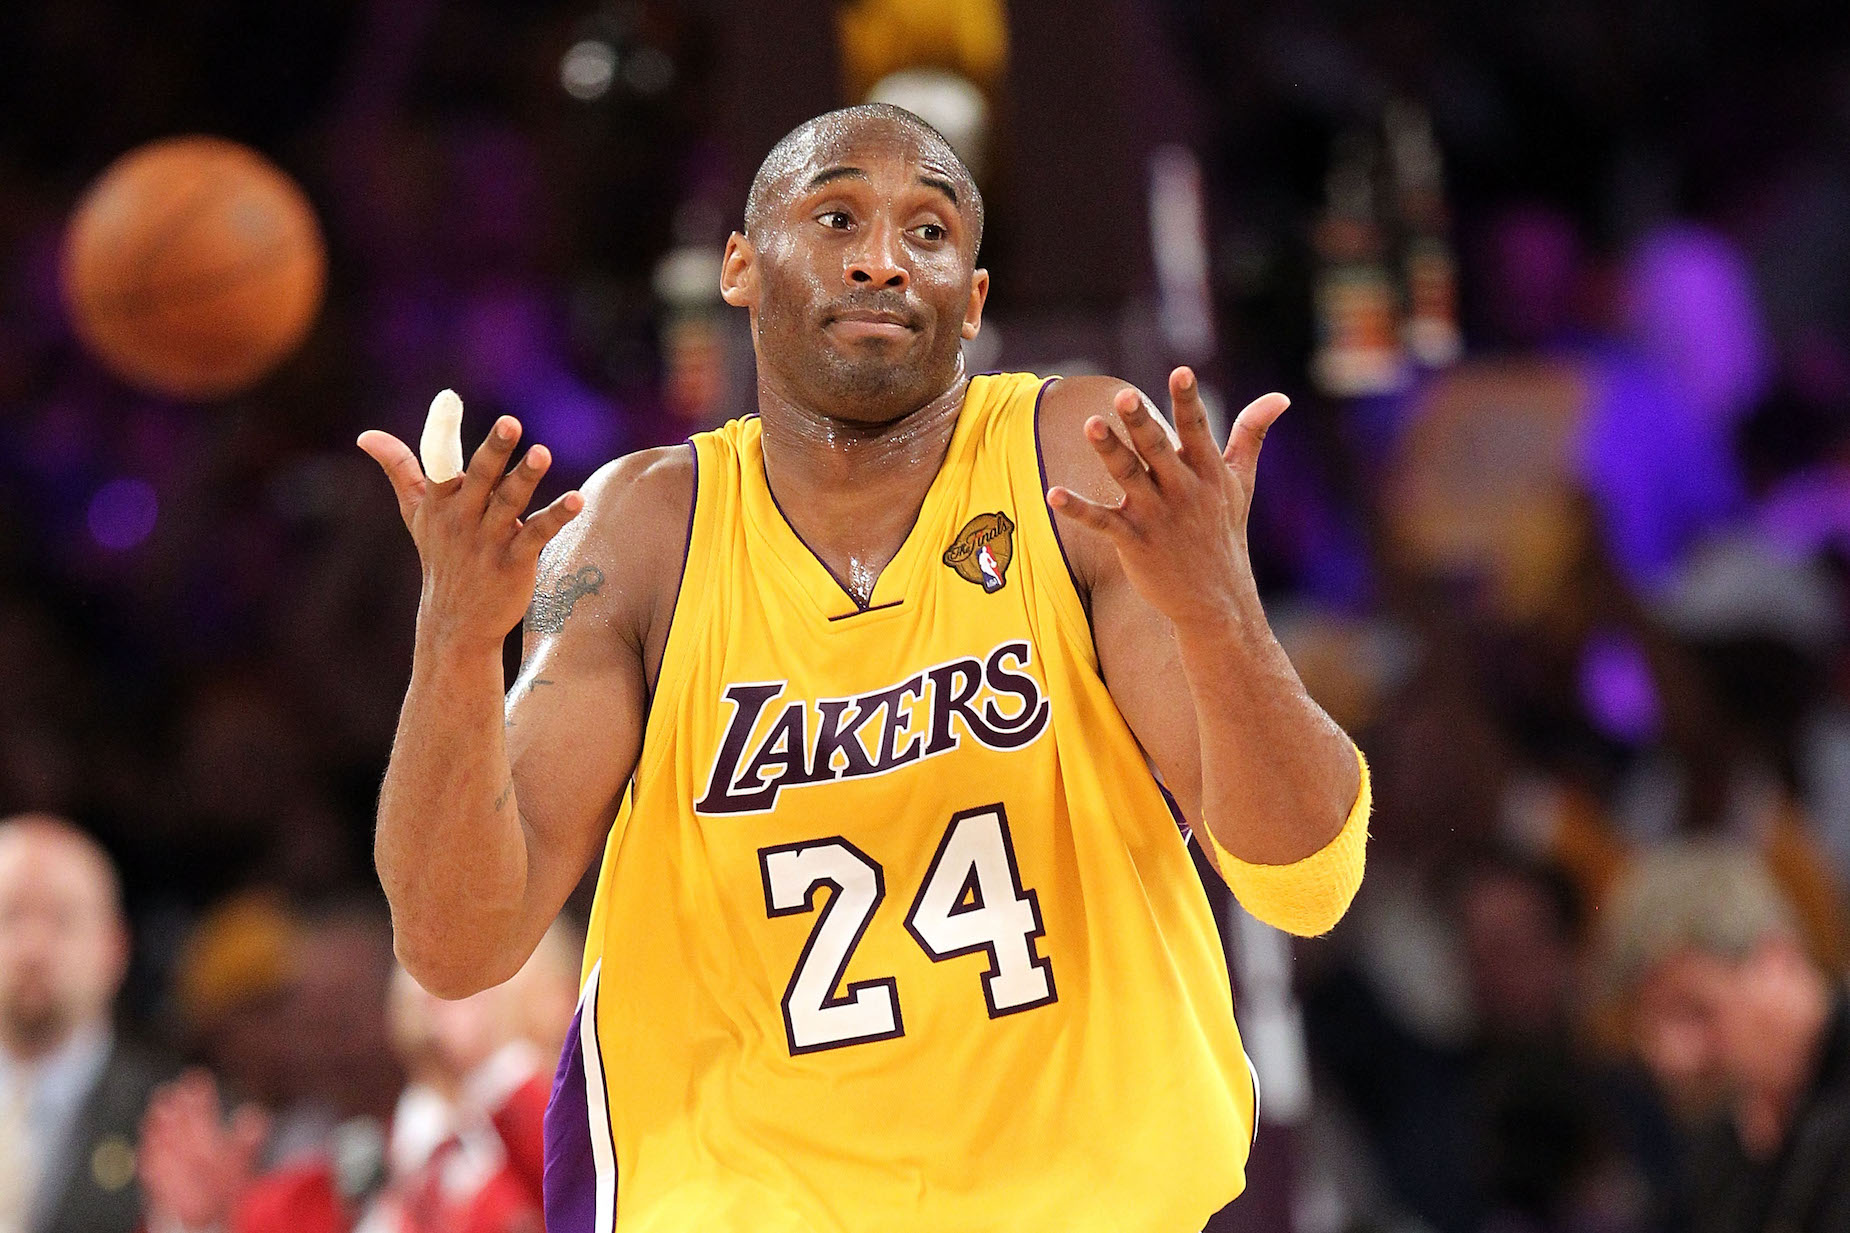 Kobe Bryant punched his teammate over $100, but eventually offered an emotional apology.